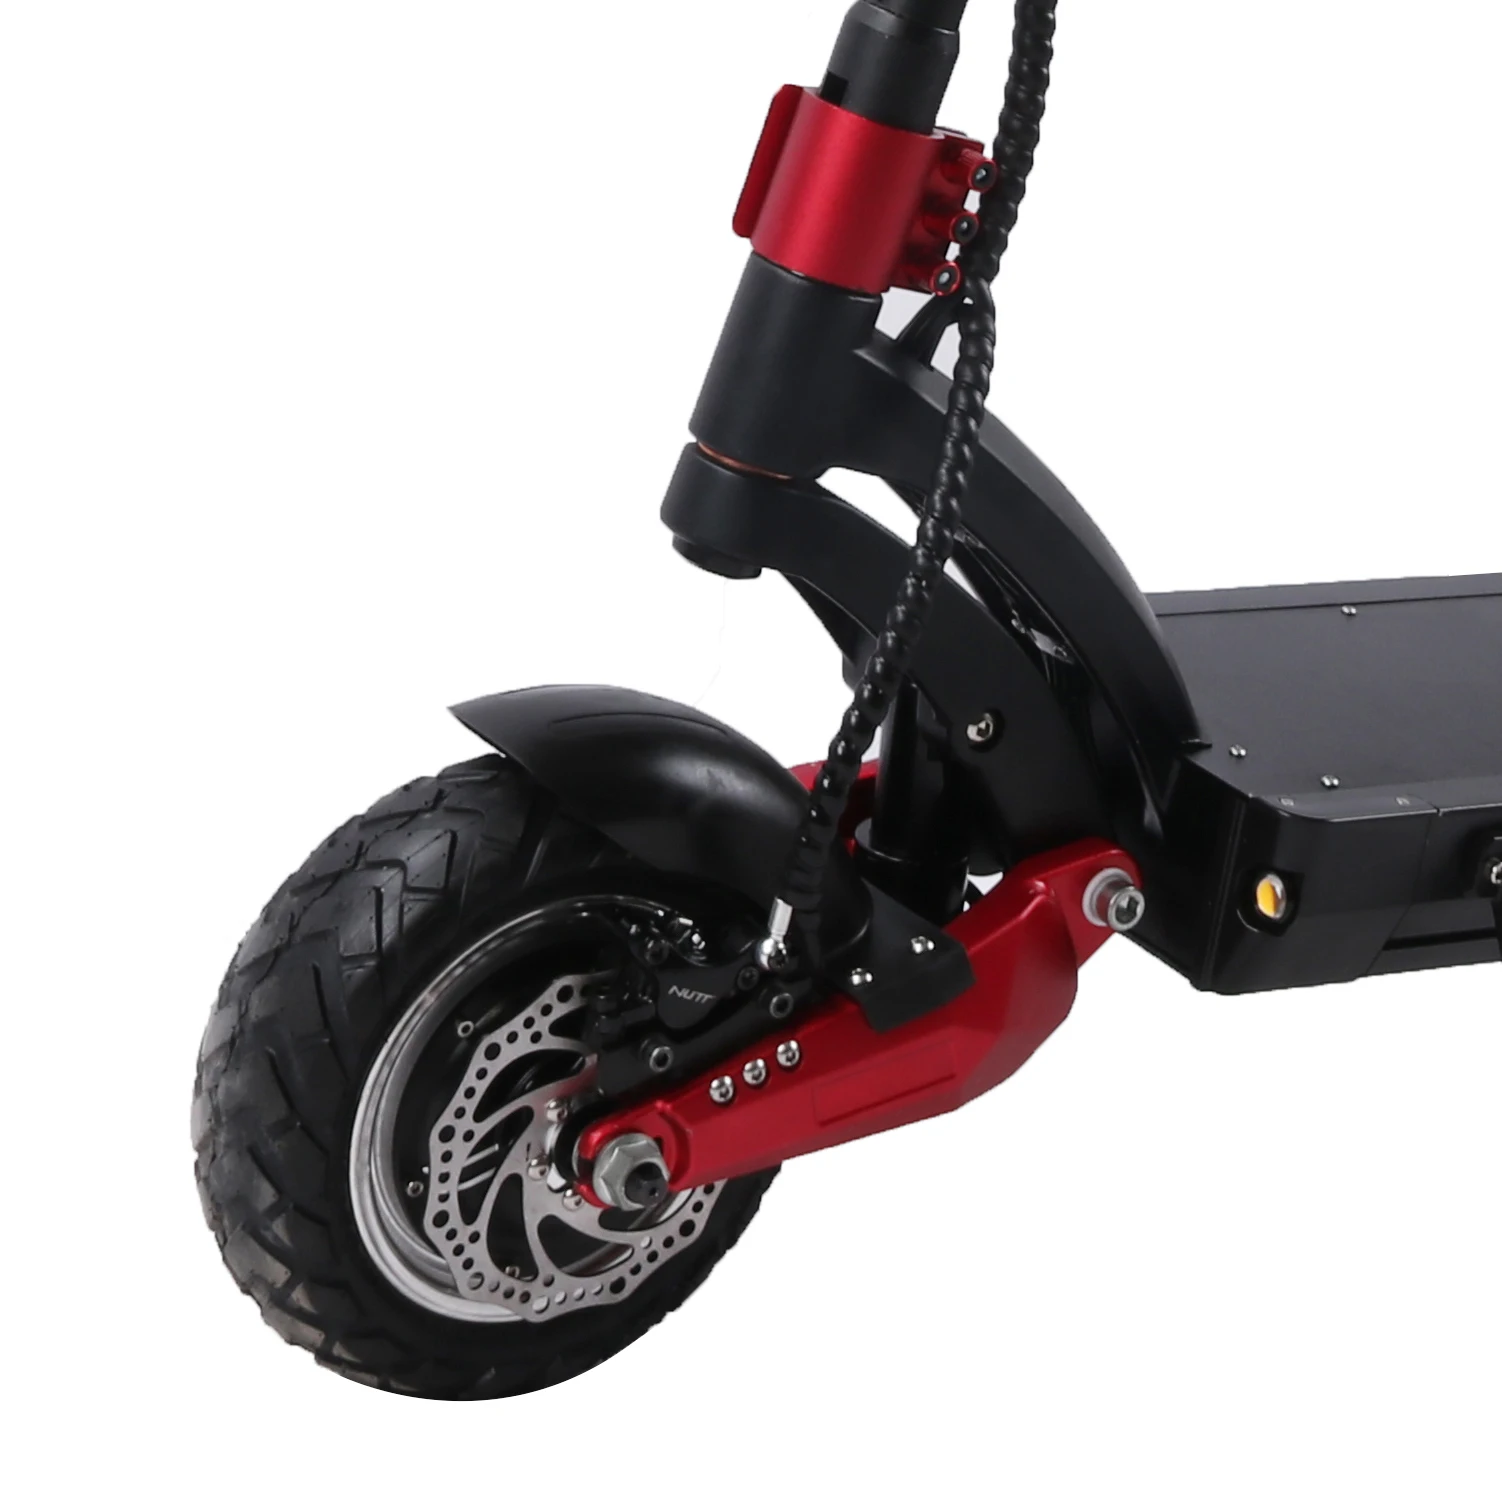 Original Factory New Arrival 1200w Double Motors Scooters Electric Foldable Dual Motor Scooter with Disc Brake Fast Motorcycle